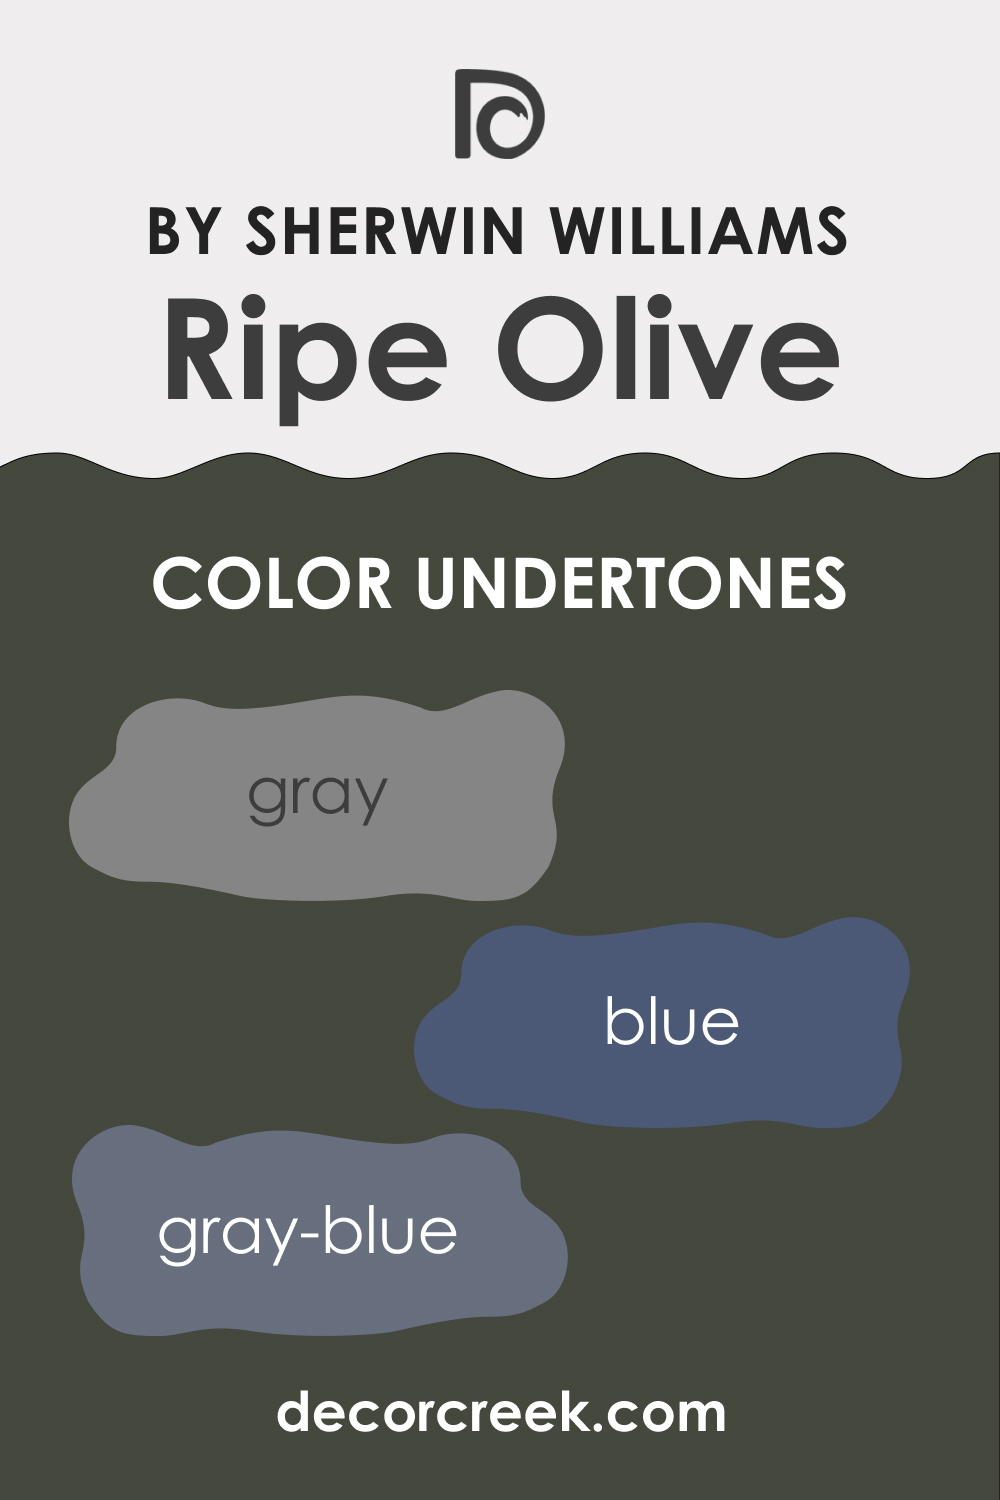 What Undertones Does Ripe Olive SW-6209 Have?